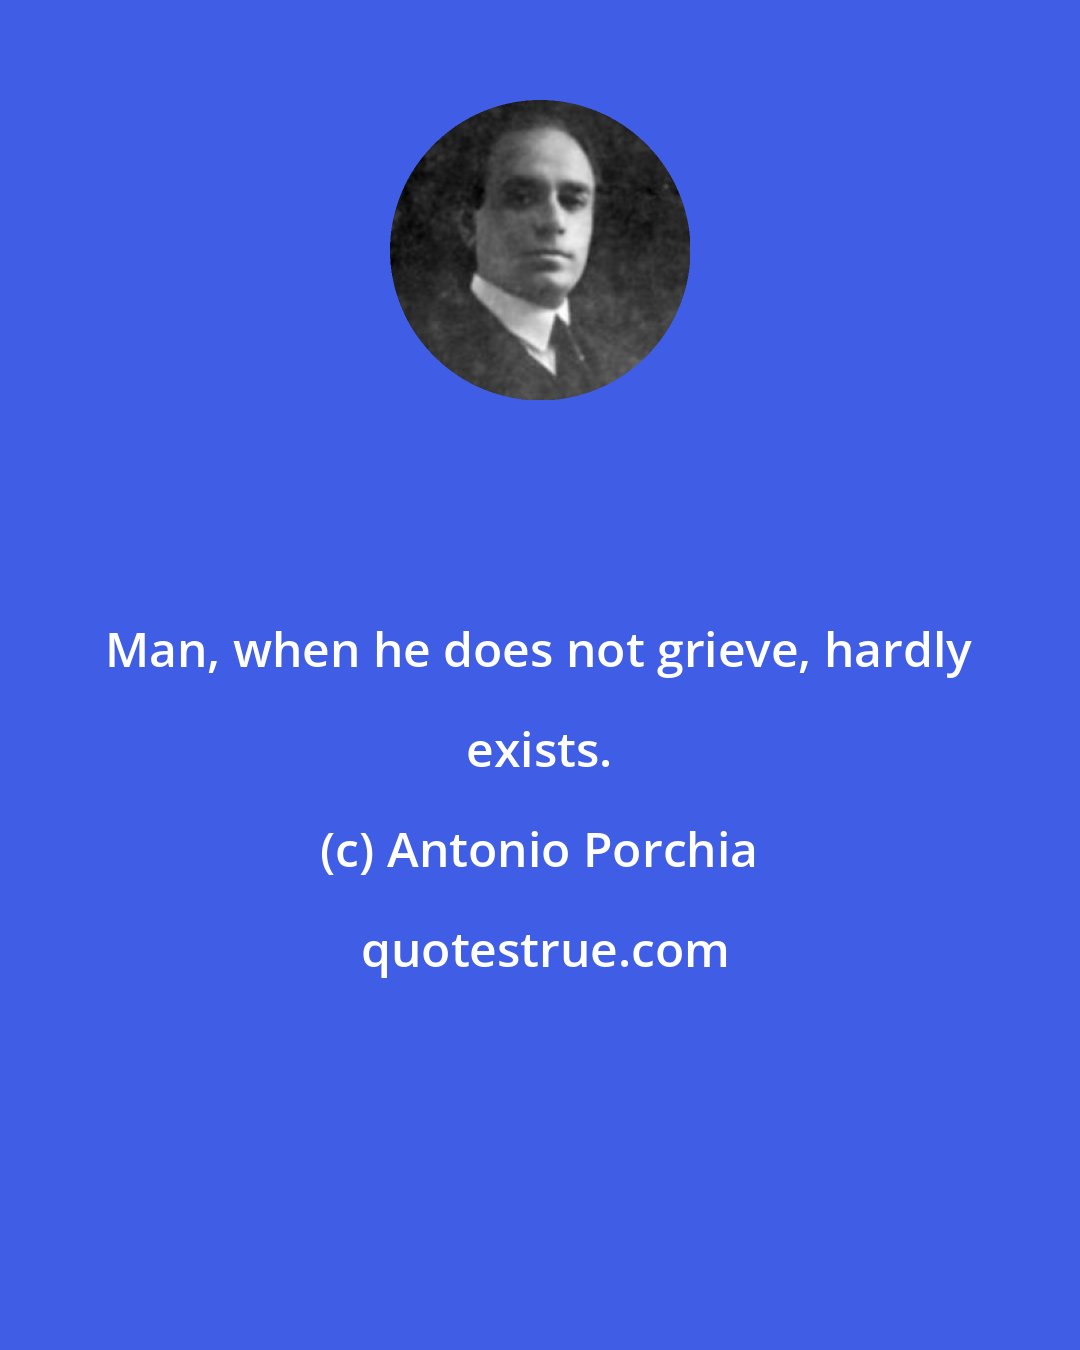 Antonio Porchia: Man, when he does not grieve, hardly exists.